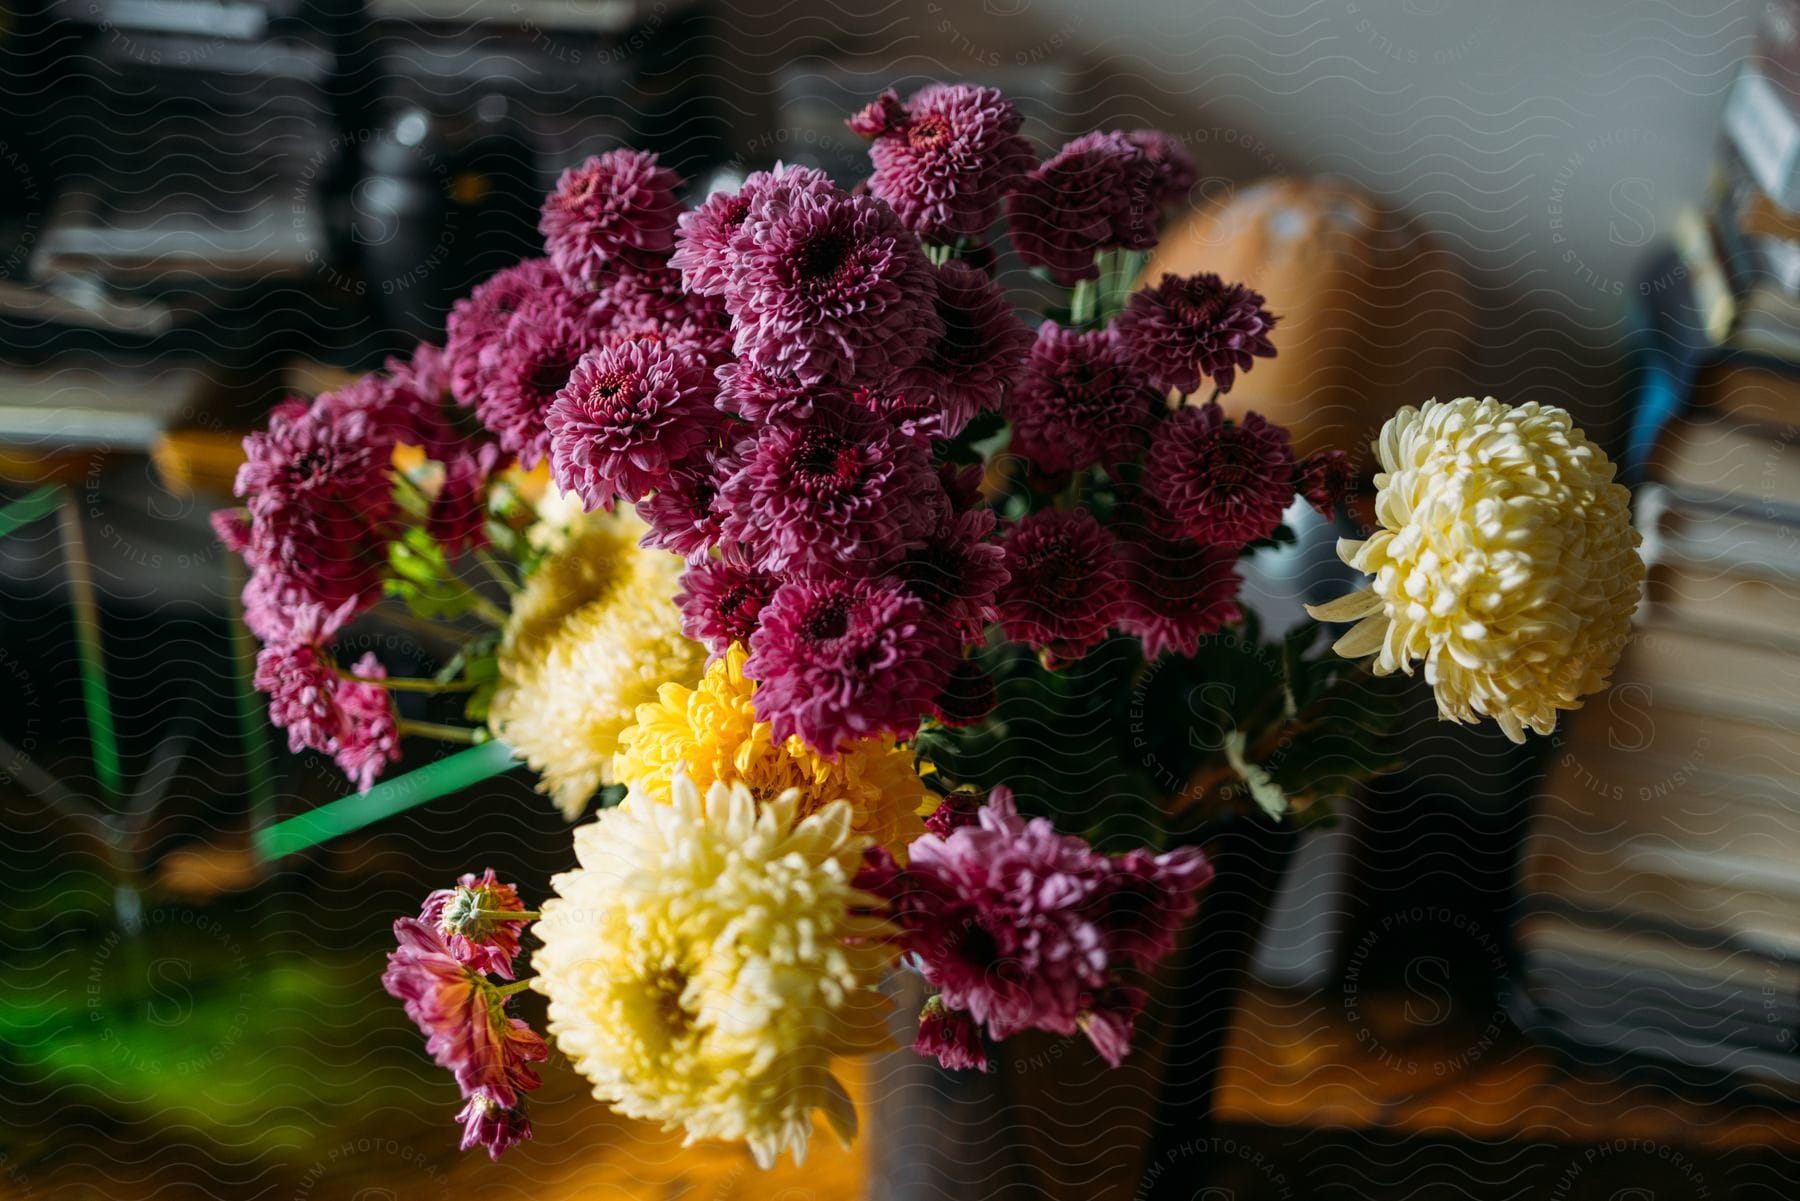 A bouquet of purple and yellow flowers are arranged in a black vase.